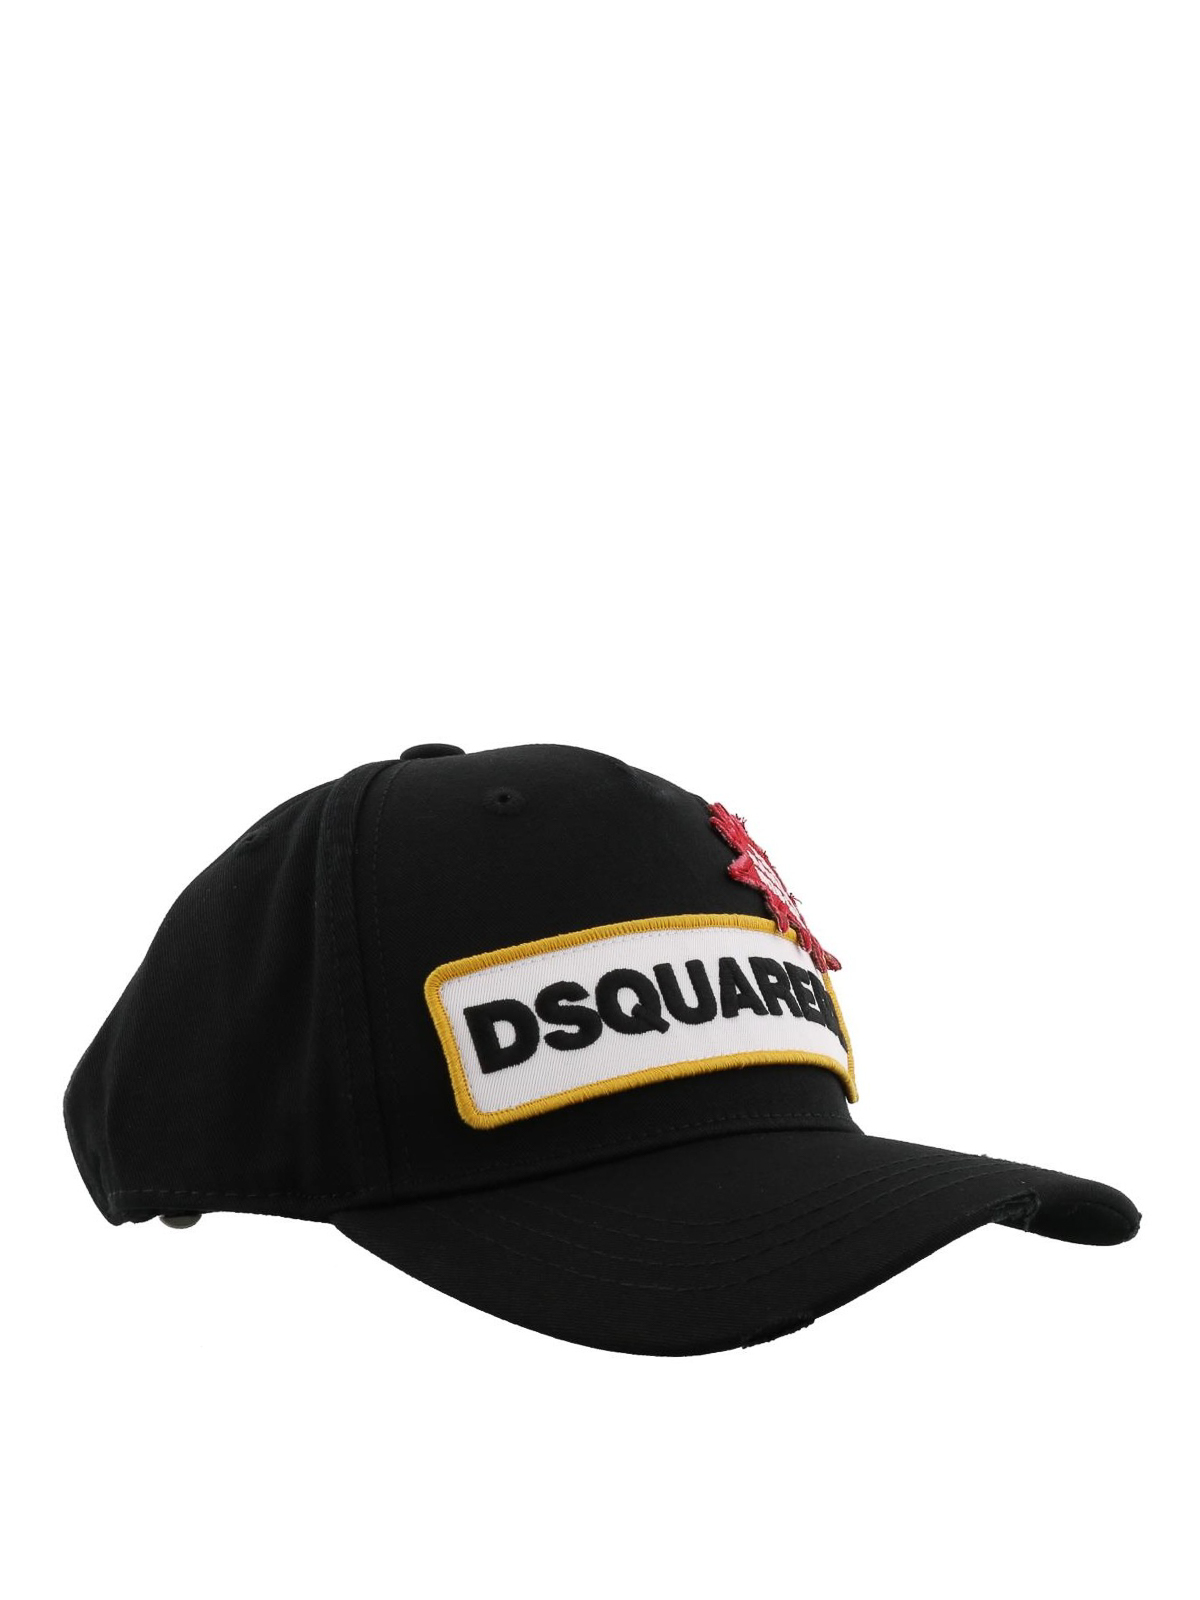 dsquared hat red